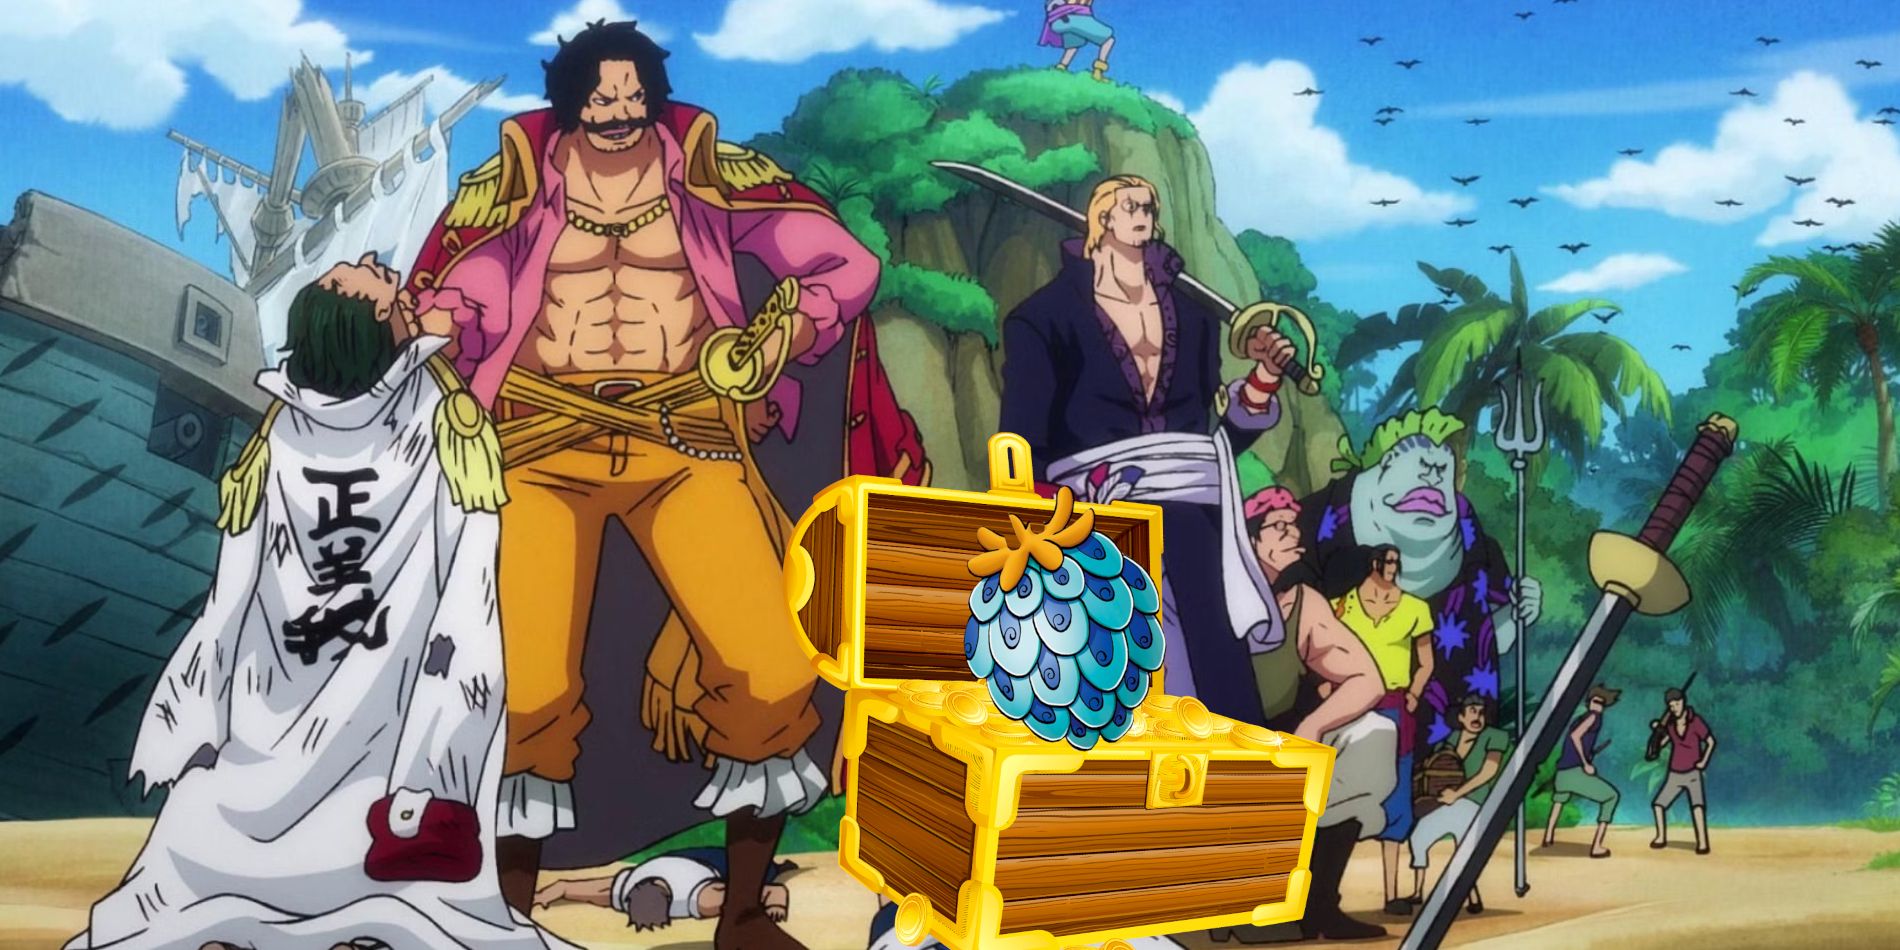 Screenshot from One Piece anime show Gol D. Roger holding an injured high-ranking Marine by his jacket while he and his crew stand on a sandy island with a treasure chest containing a devil fruit next to them.